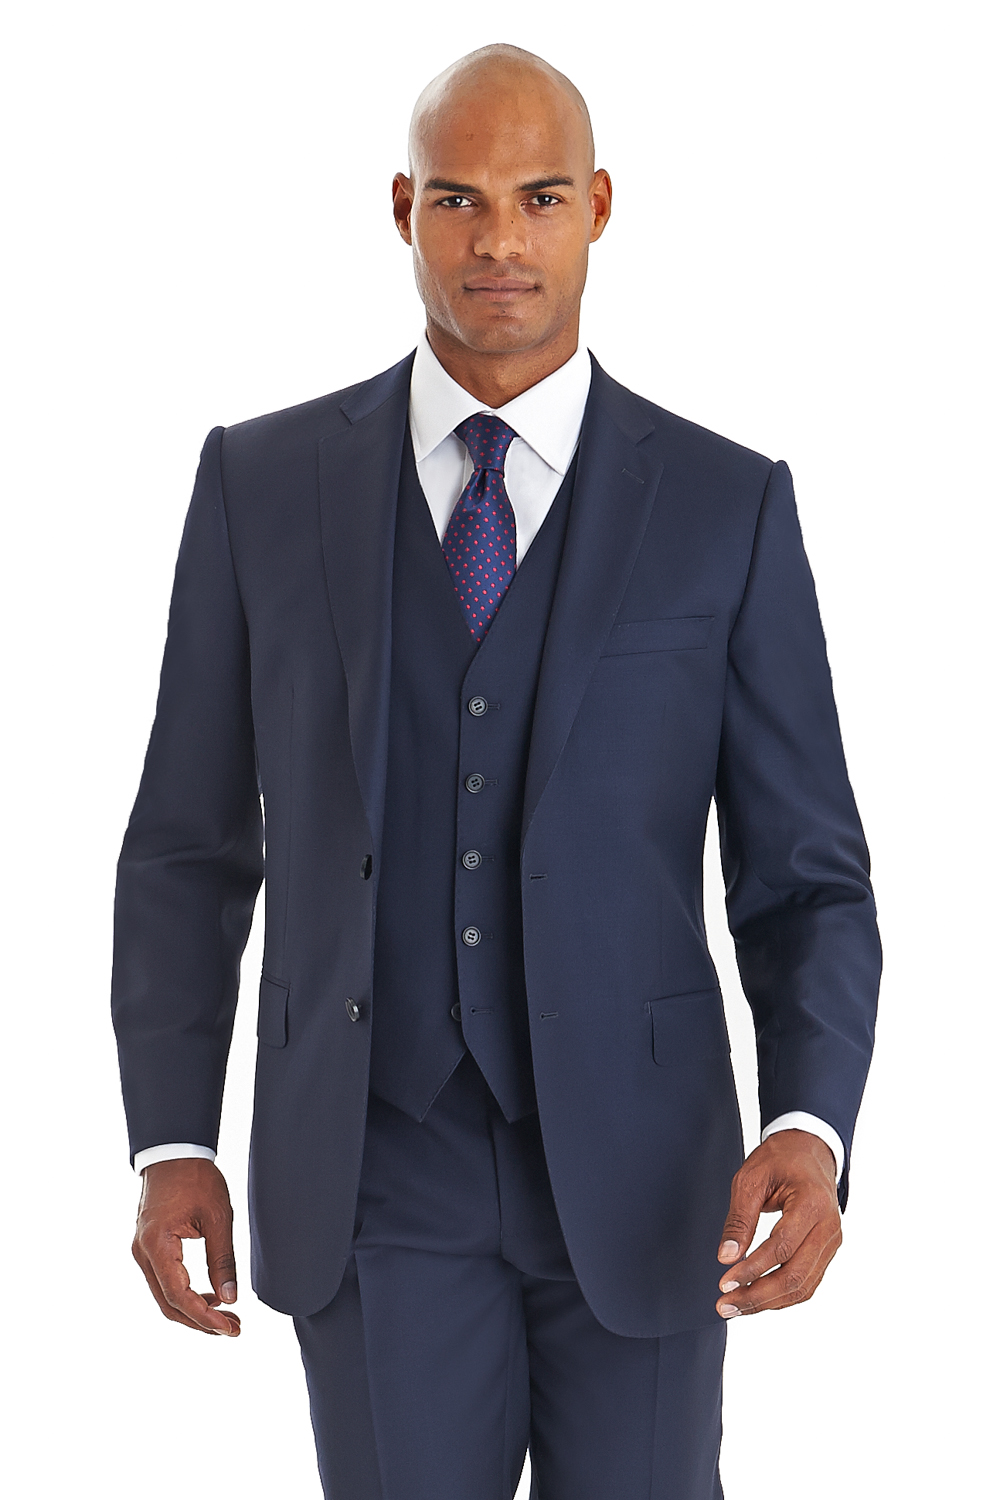 Savoy Taylors Guild Exclusive Regular Fit Navy